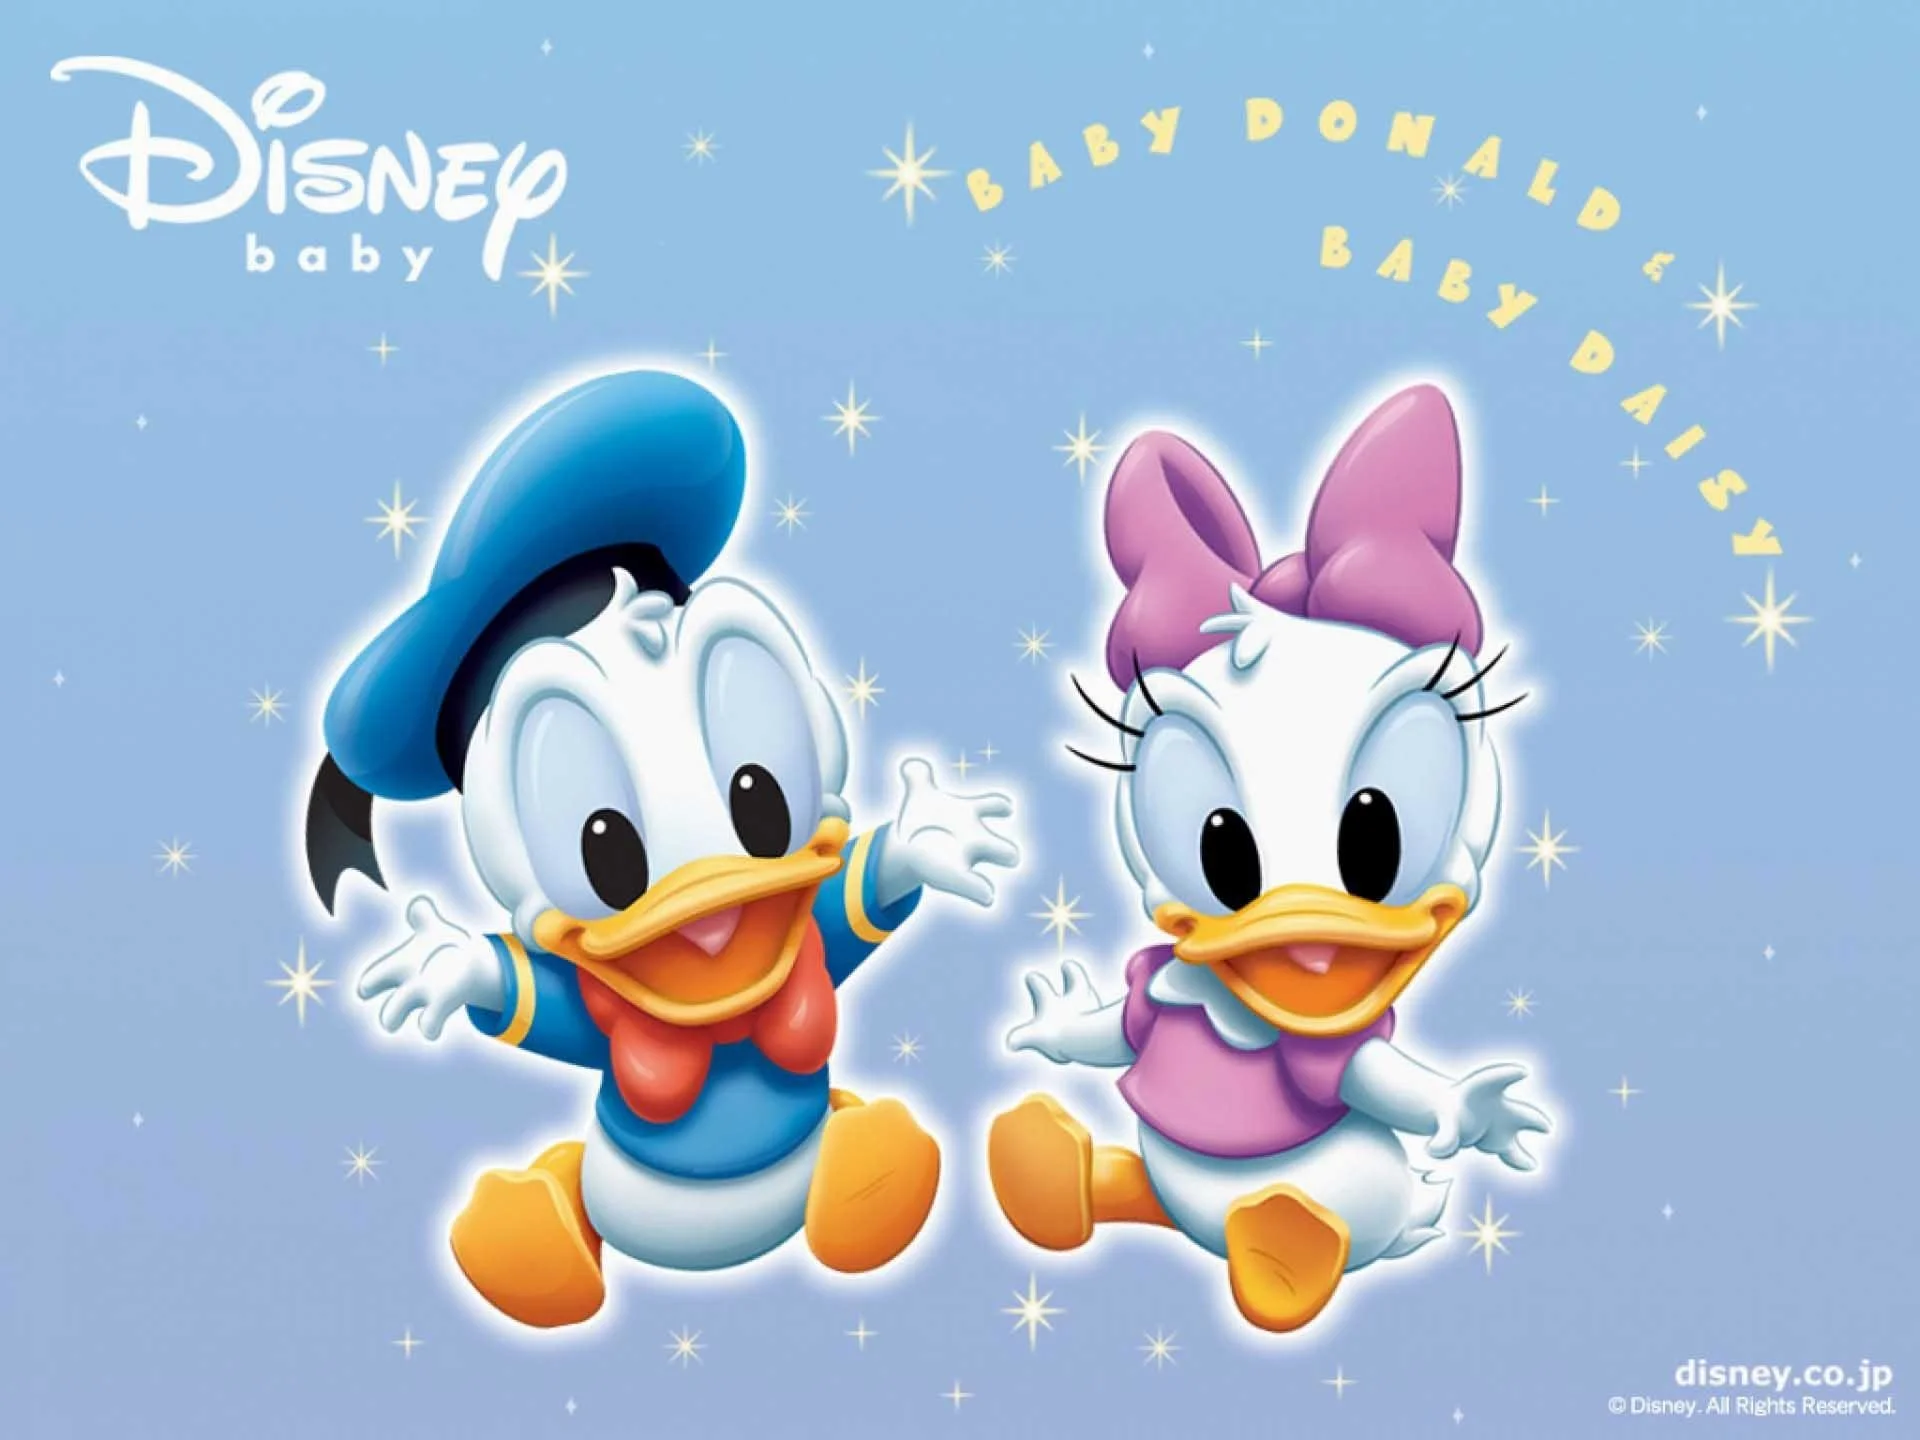 Wallpaper.wiki Cute baby donald duck images PIC